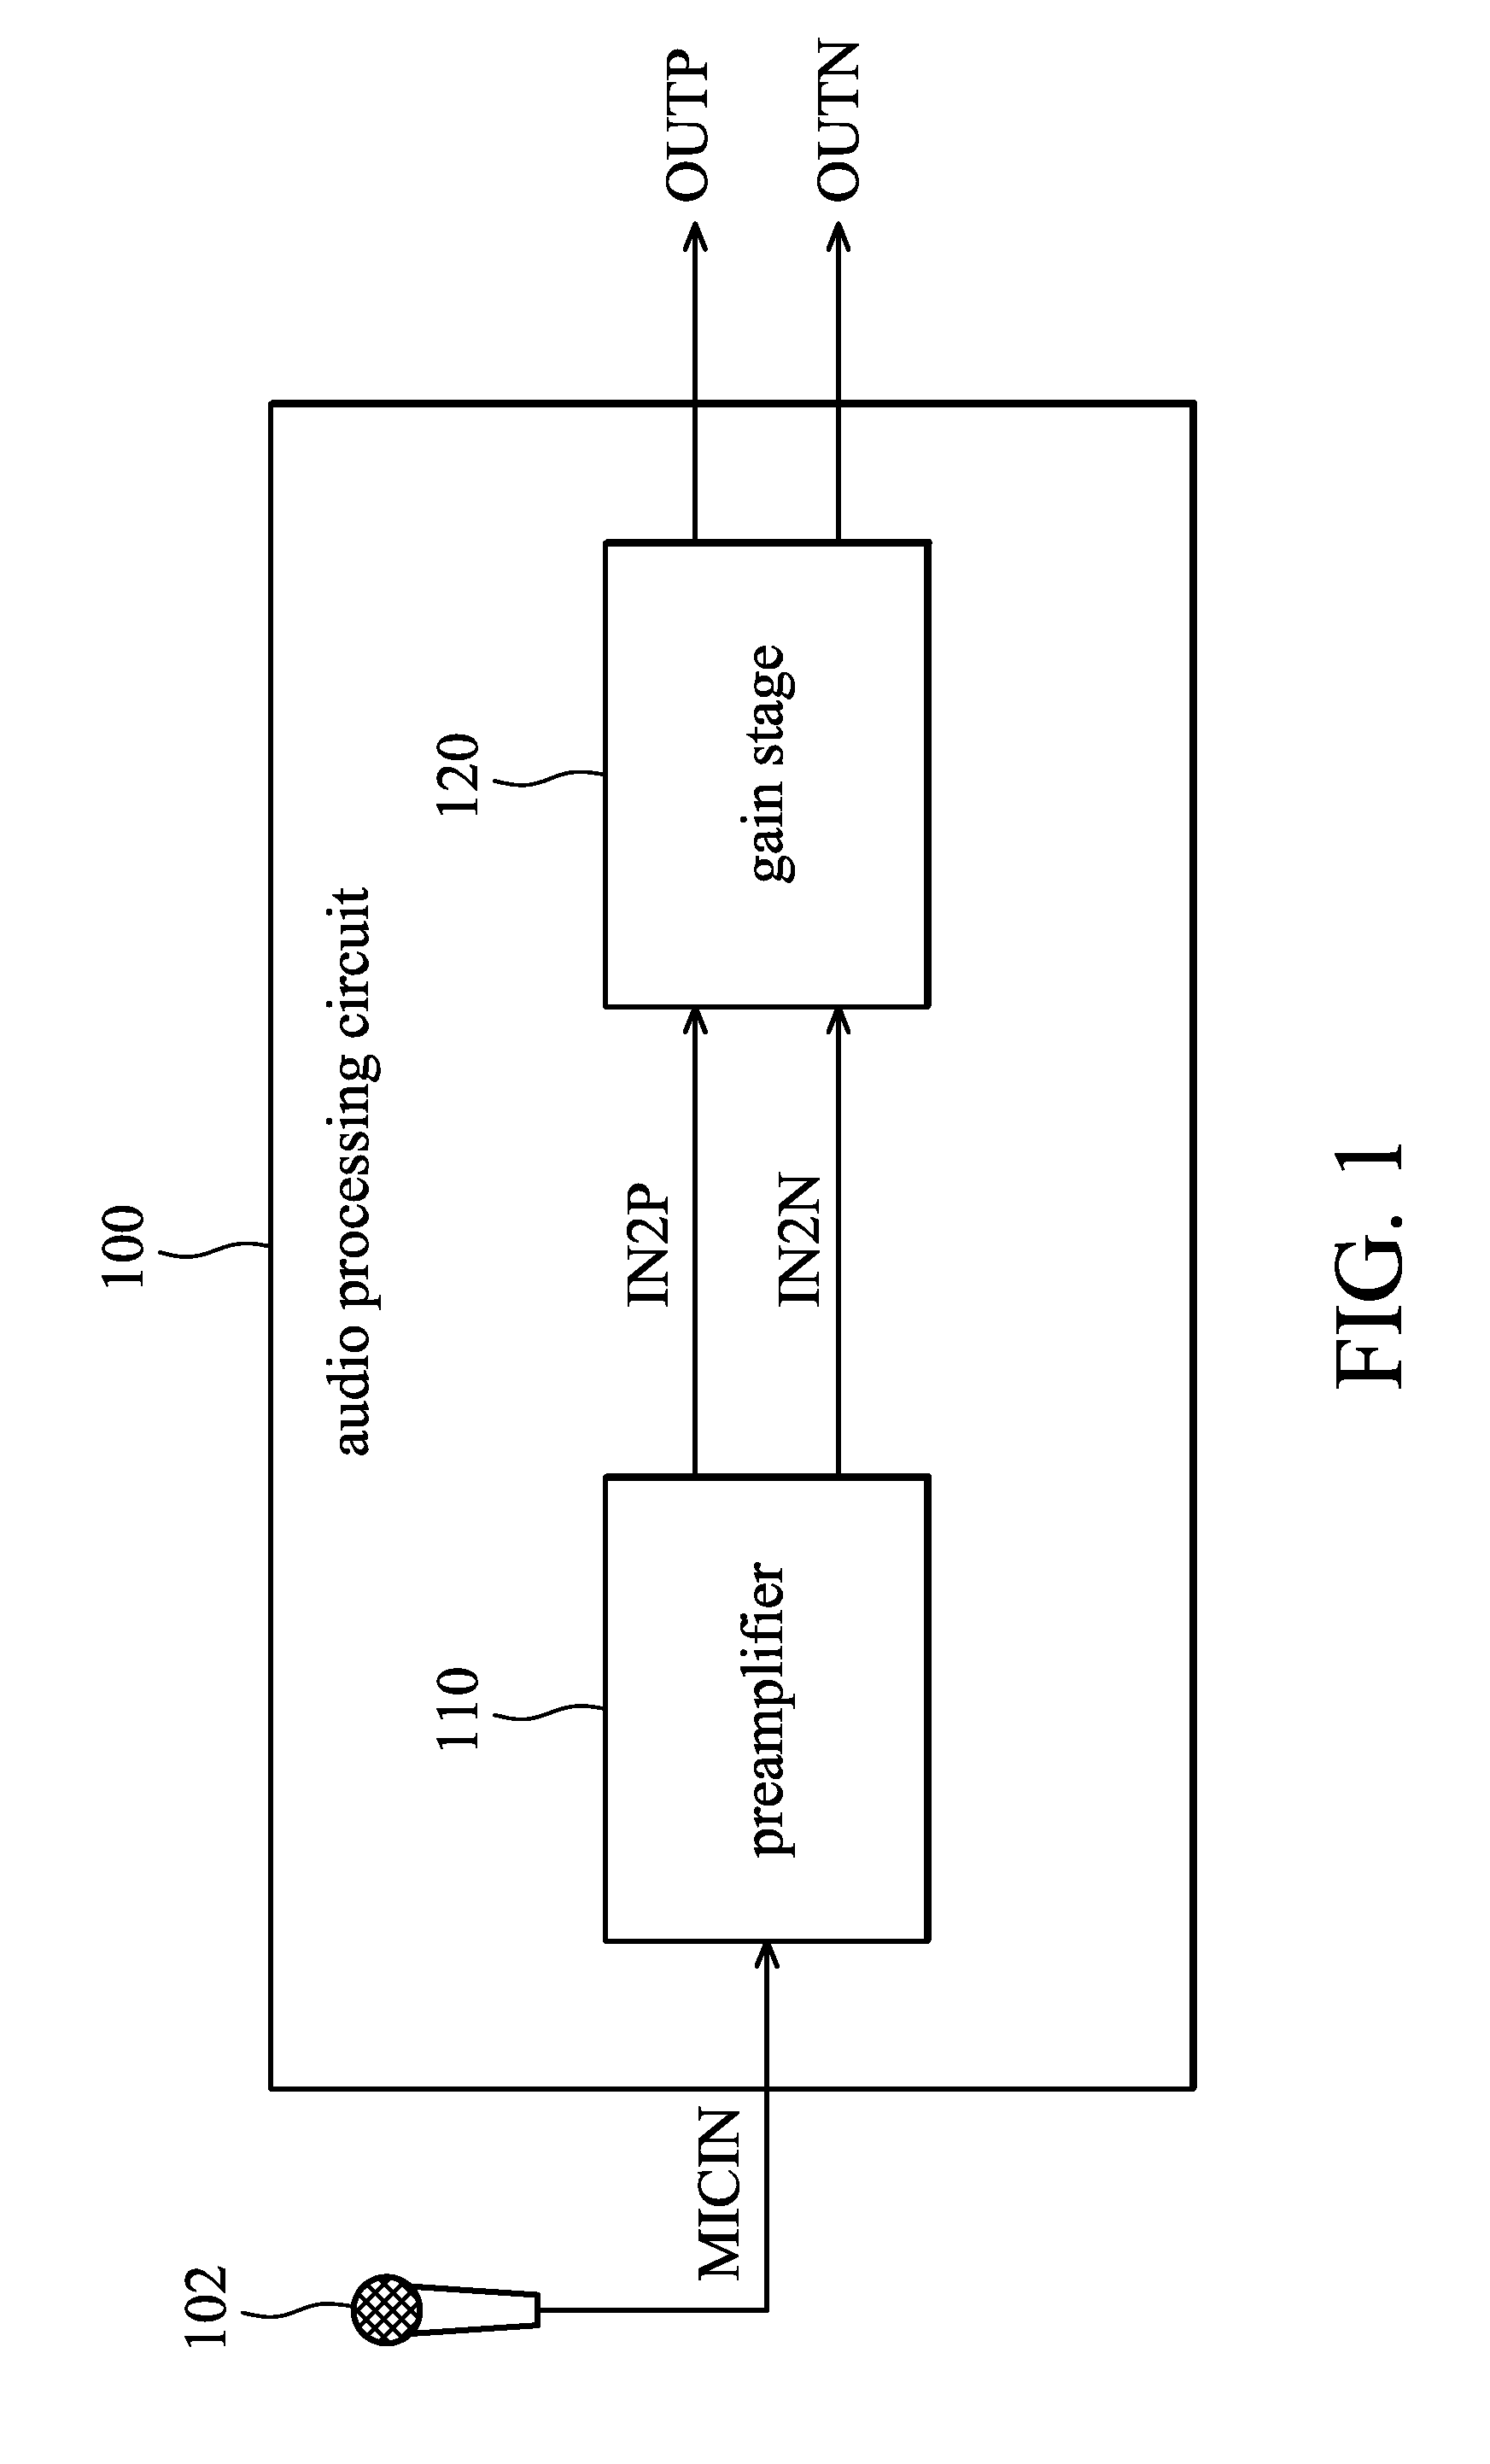 Audio processing circuit and preamplifier circuit